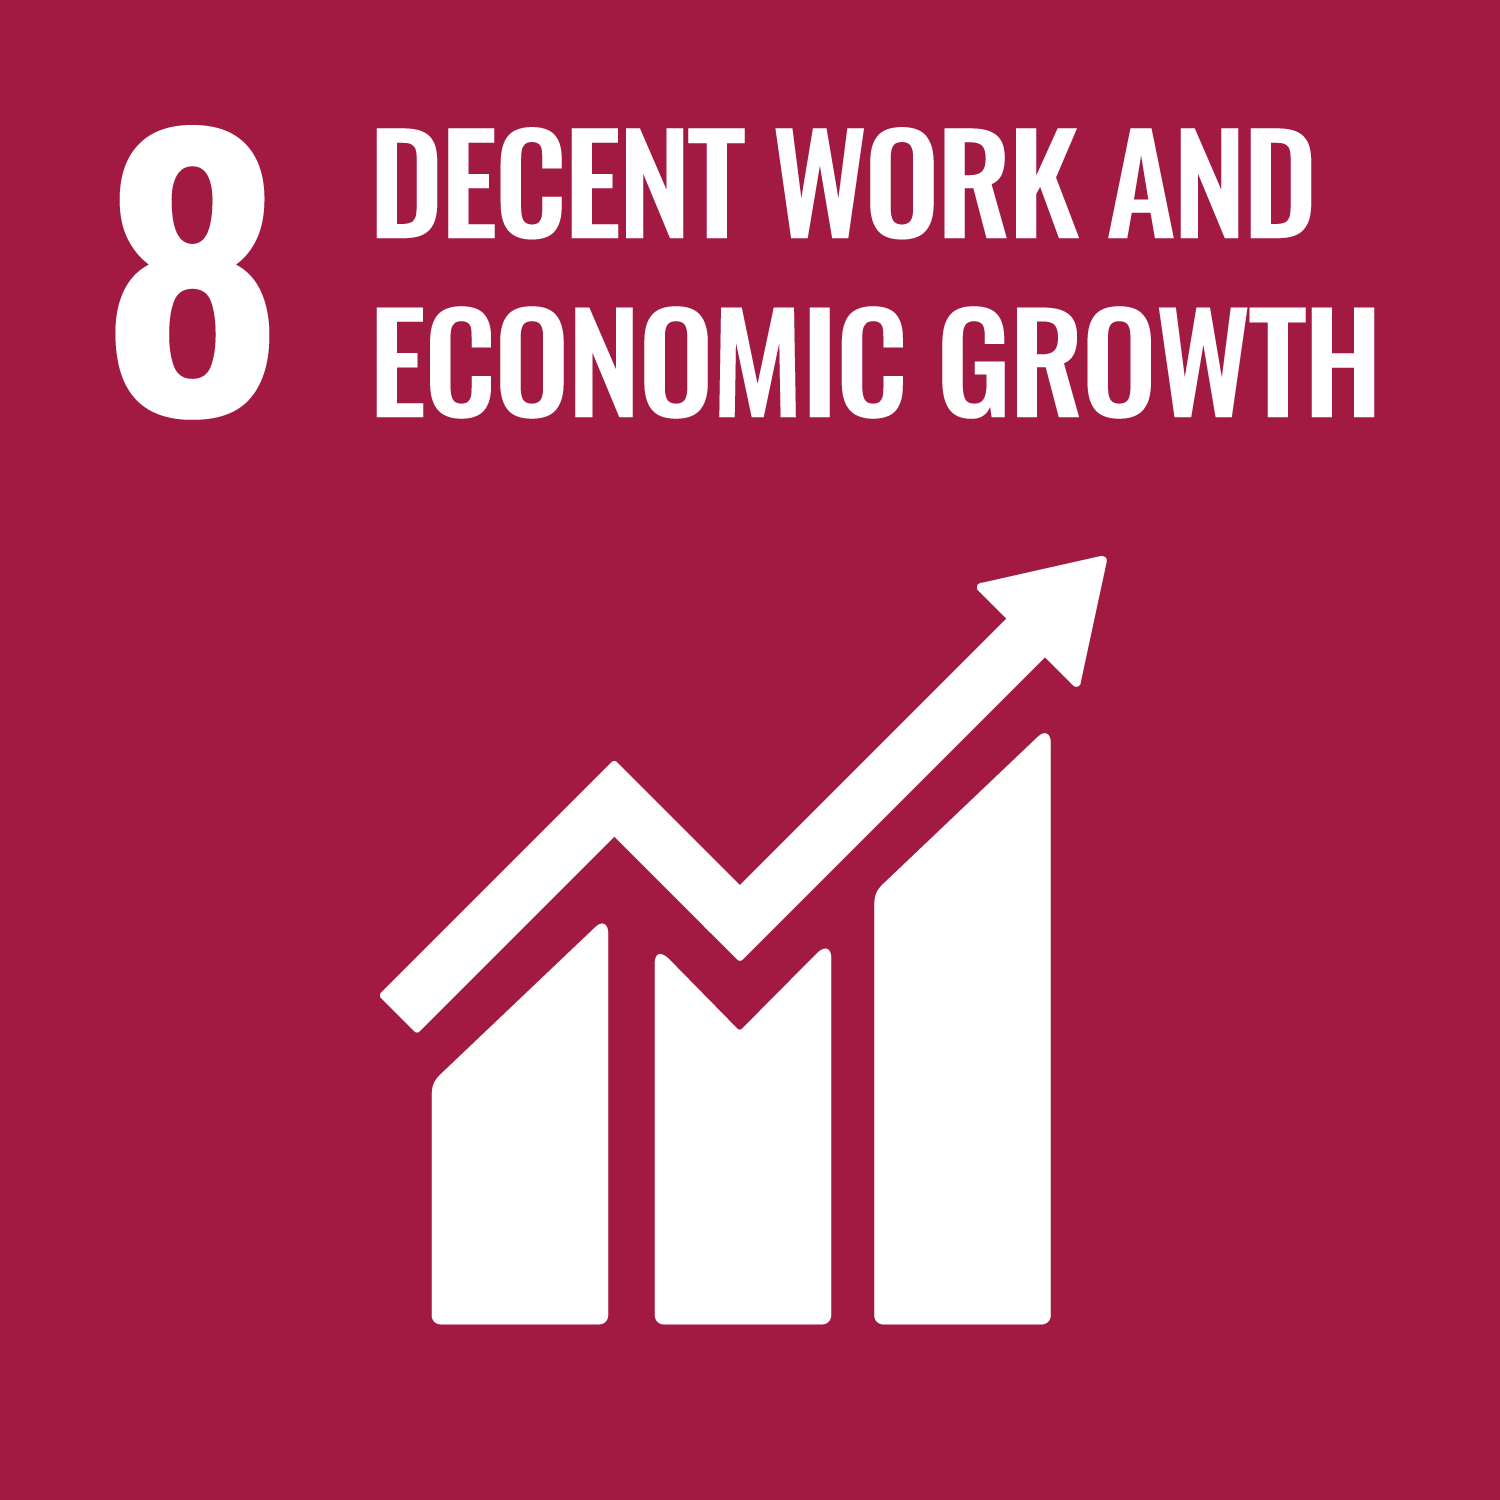 Goal 08 Decent Work and Economic Growth